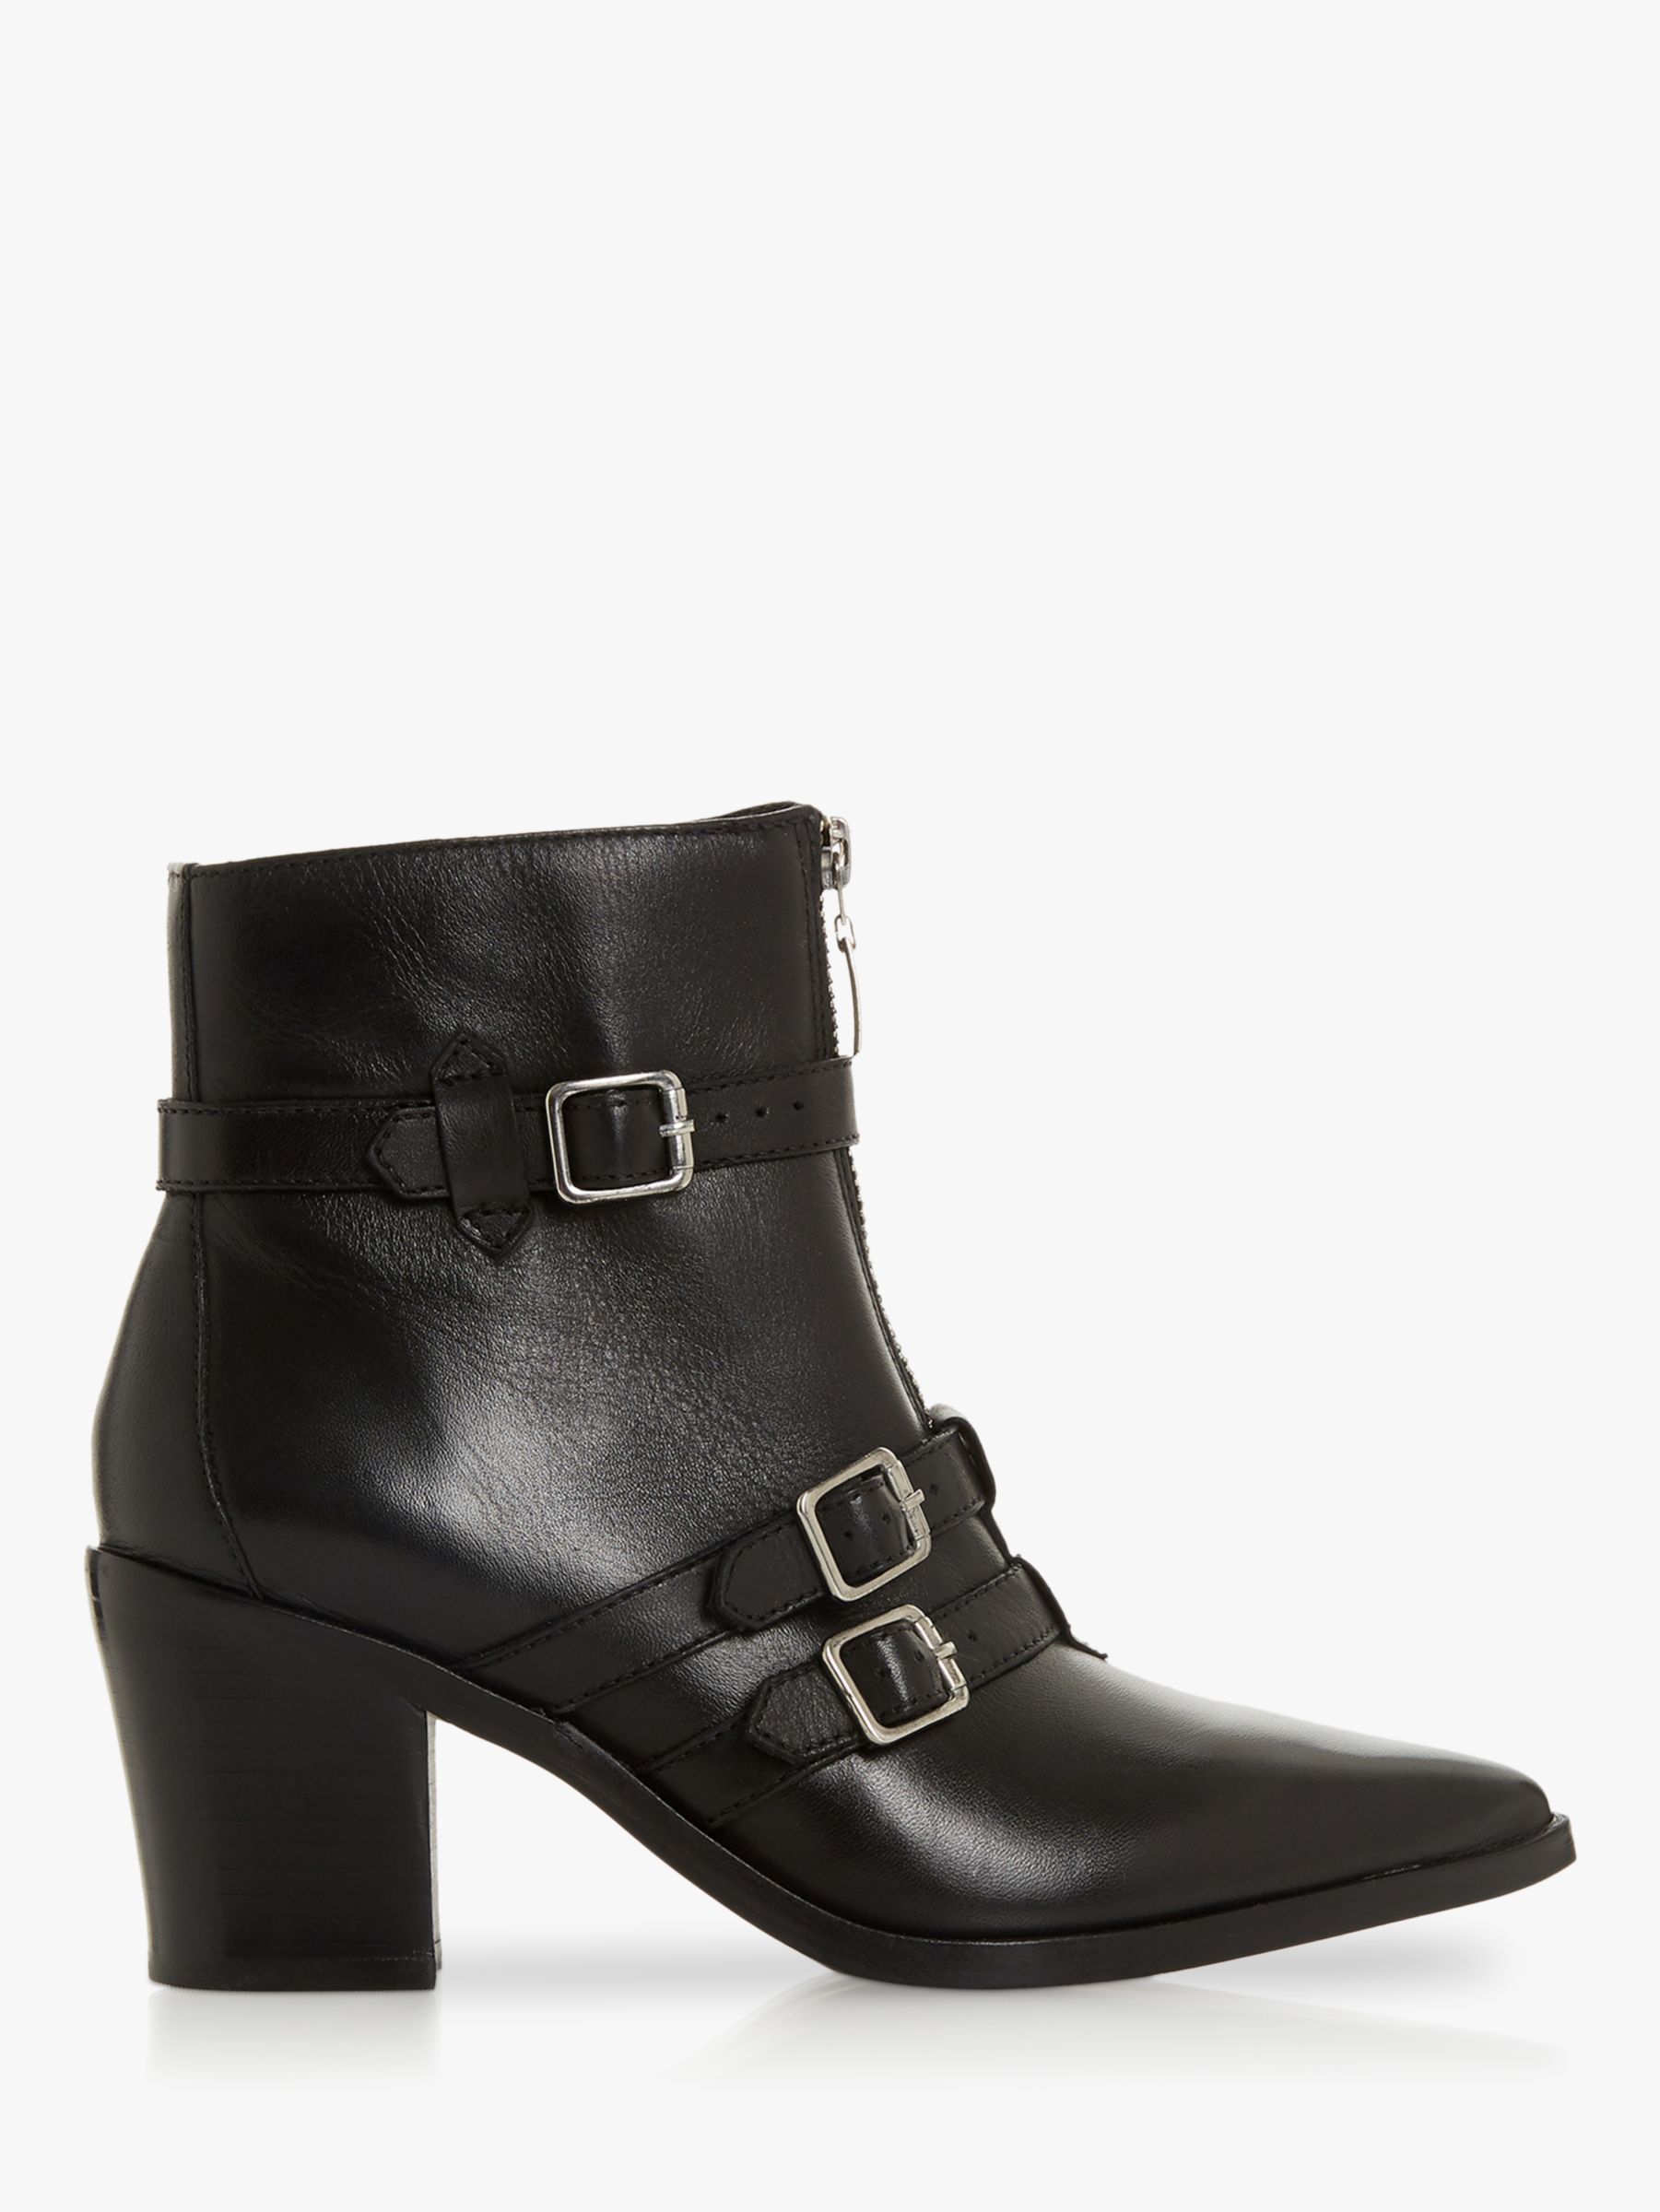 Dune Princely Block Heel Ankle Boots, Black Leather